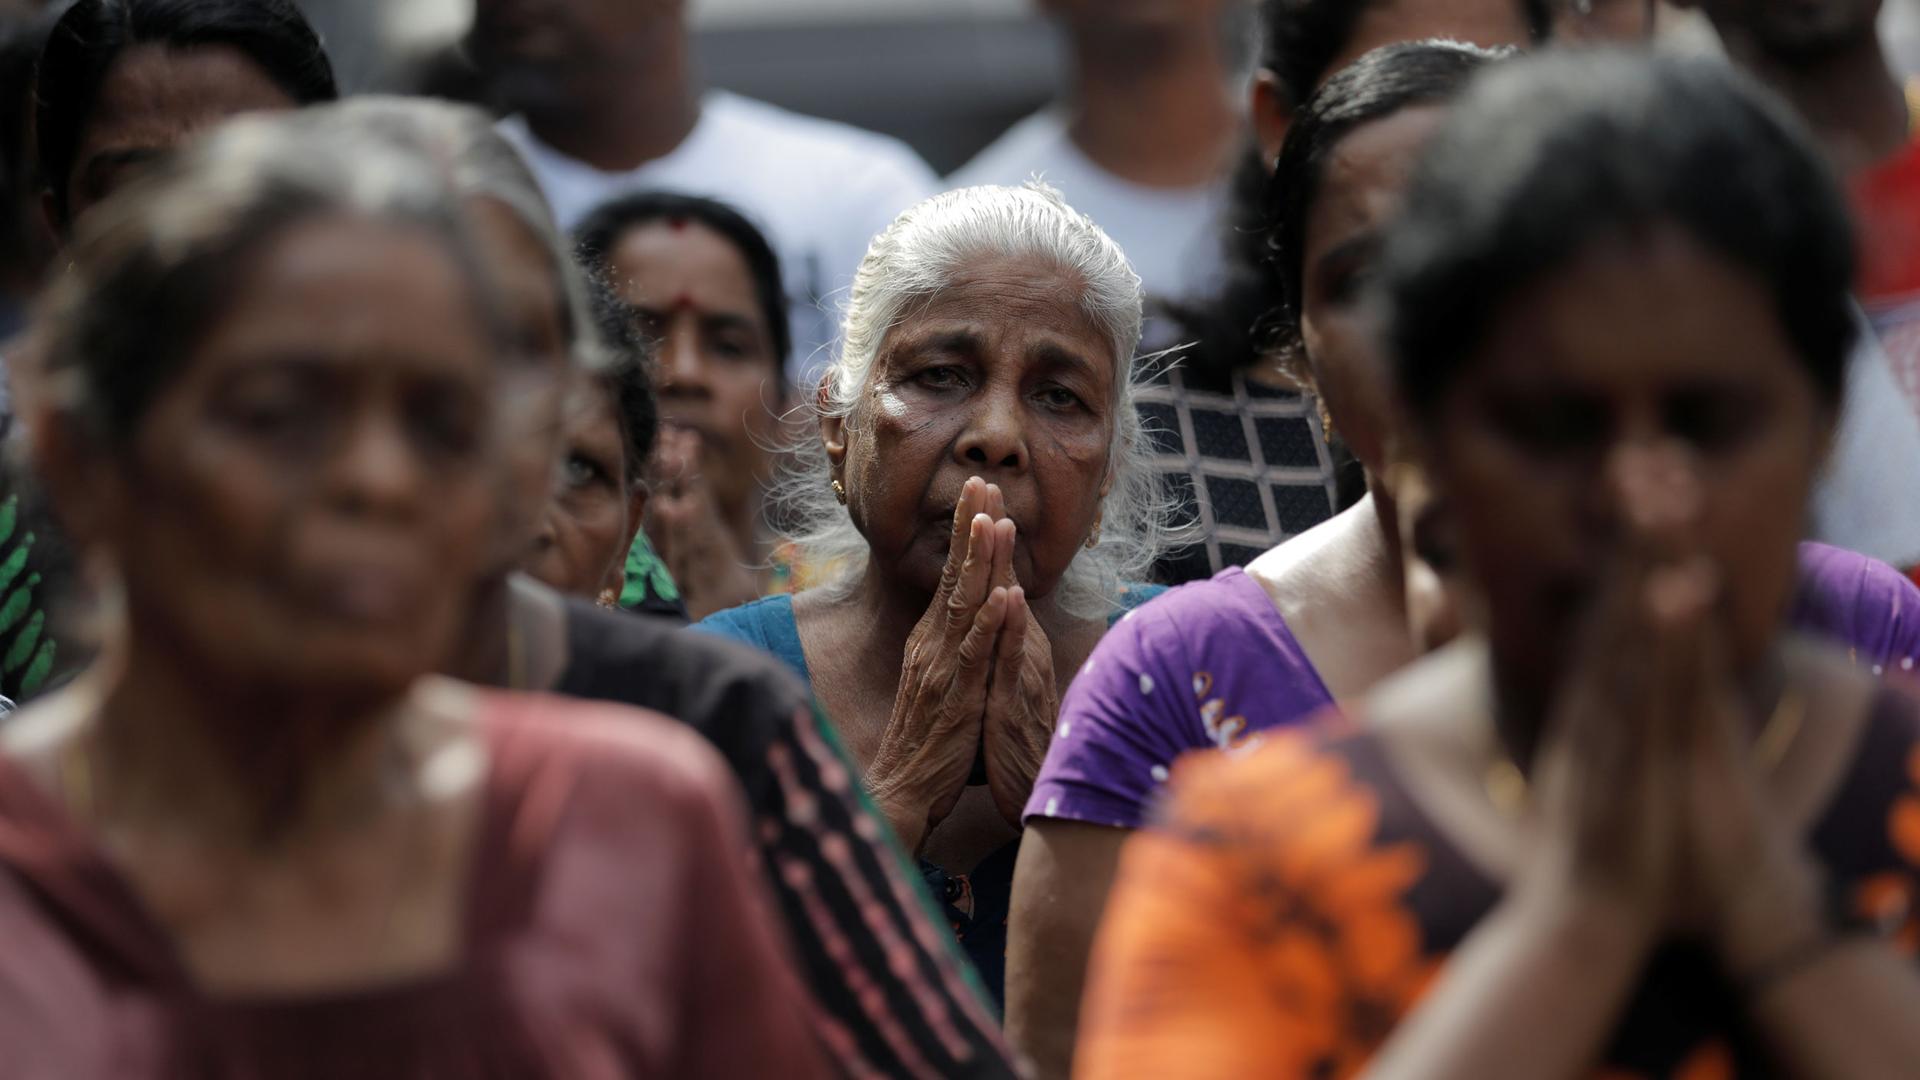 A crowd of older women are shown with their hands folded in prayer